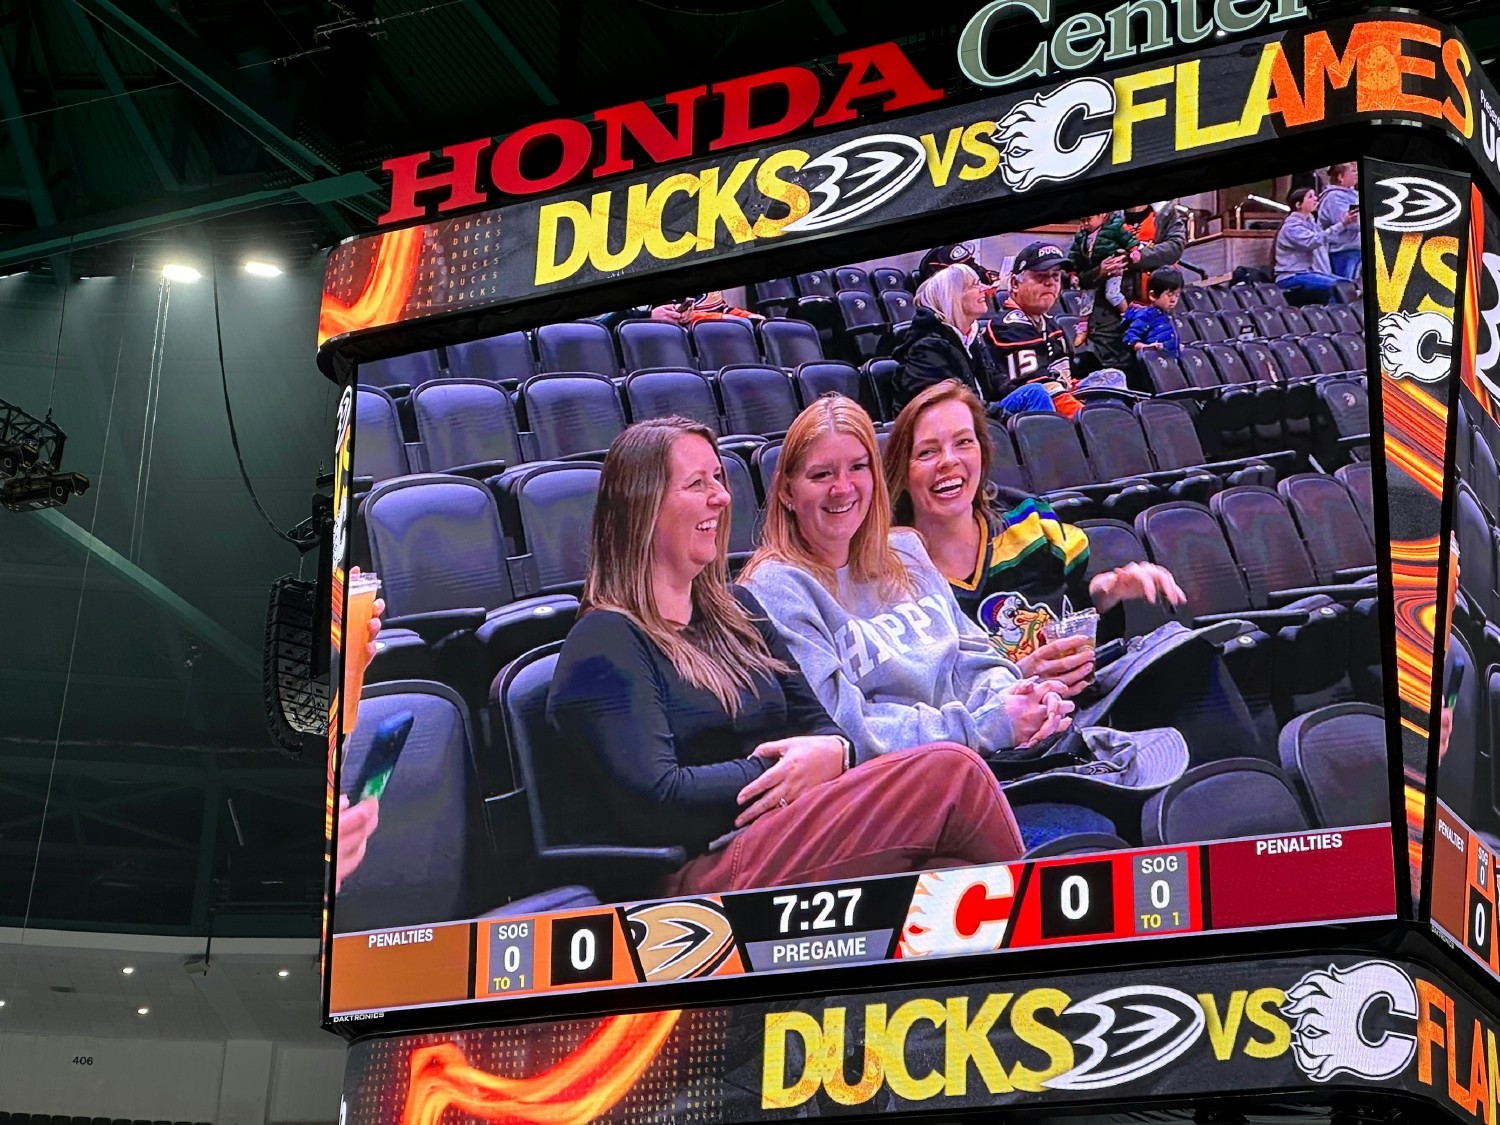 Making it on the big screen at the Ducks game!